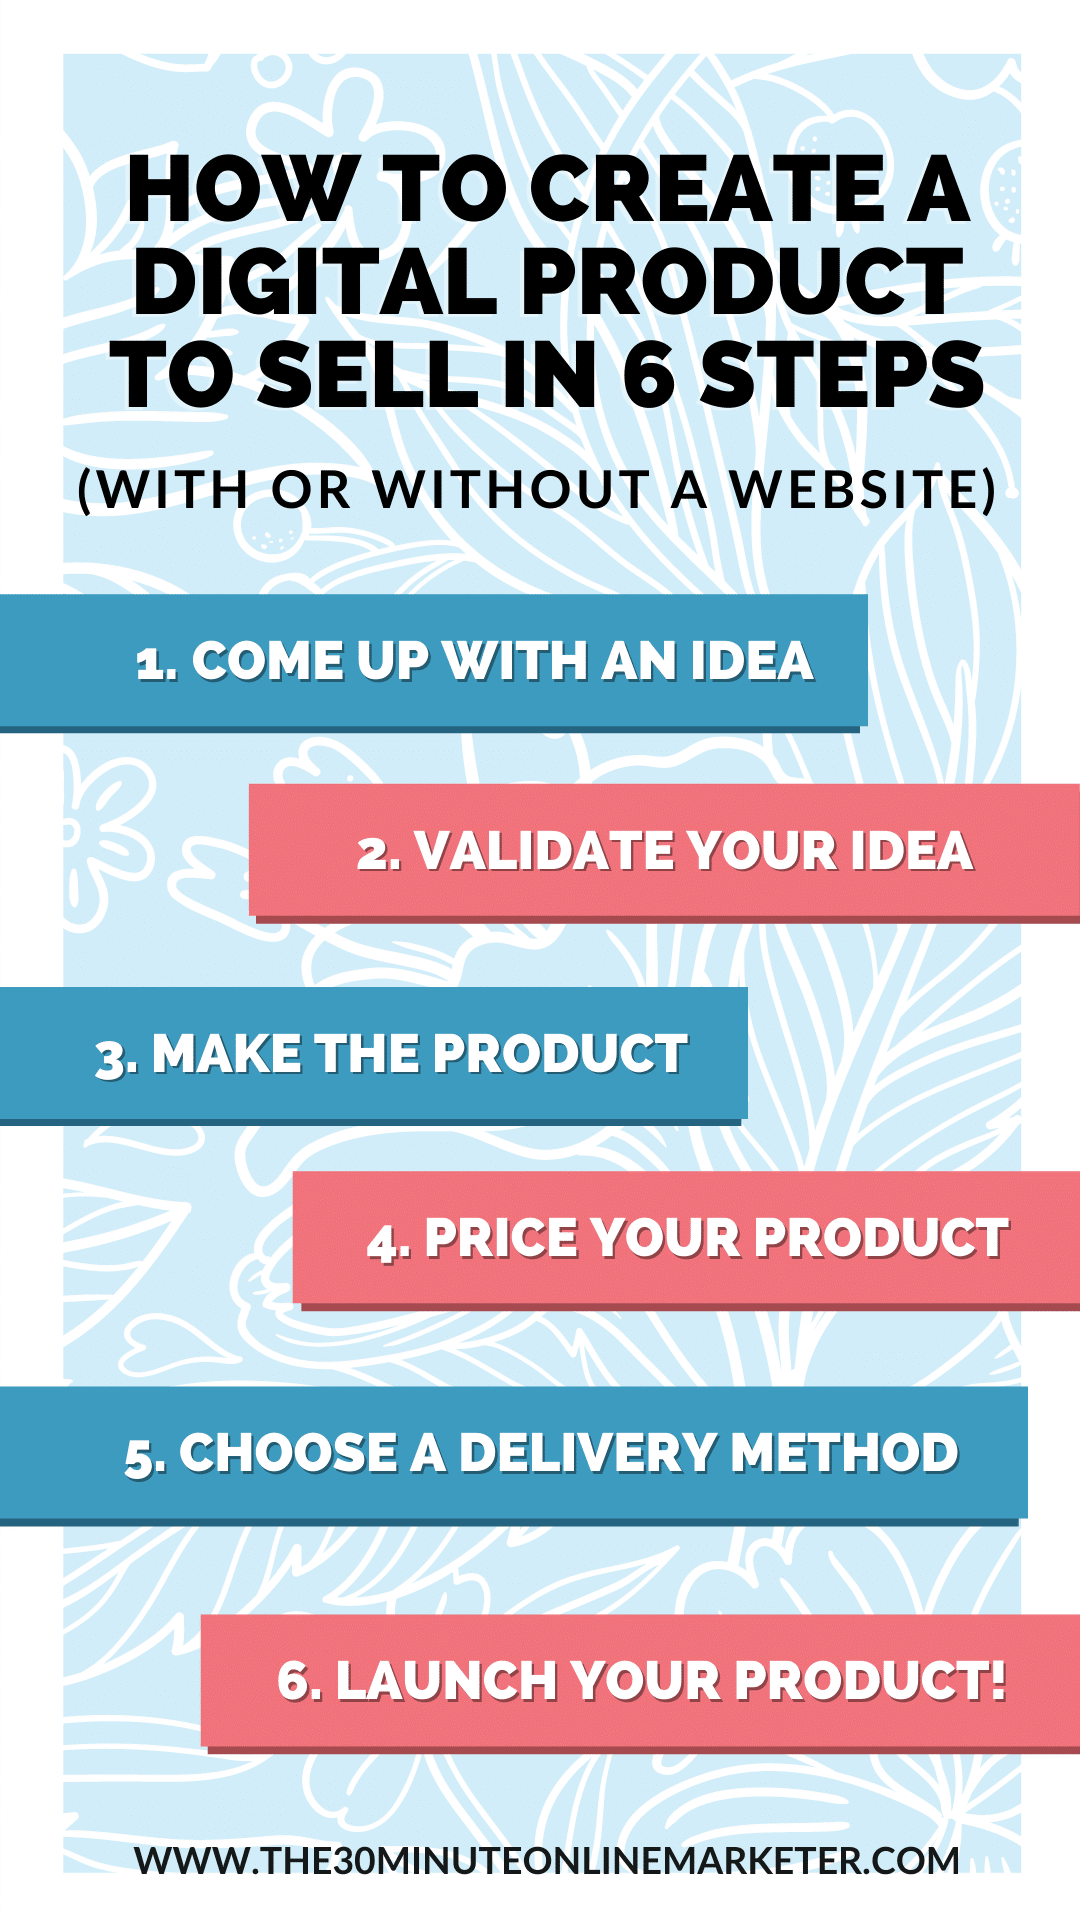 How to Create Digital Products You Can Sell Online in 6 Simple Steps